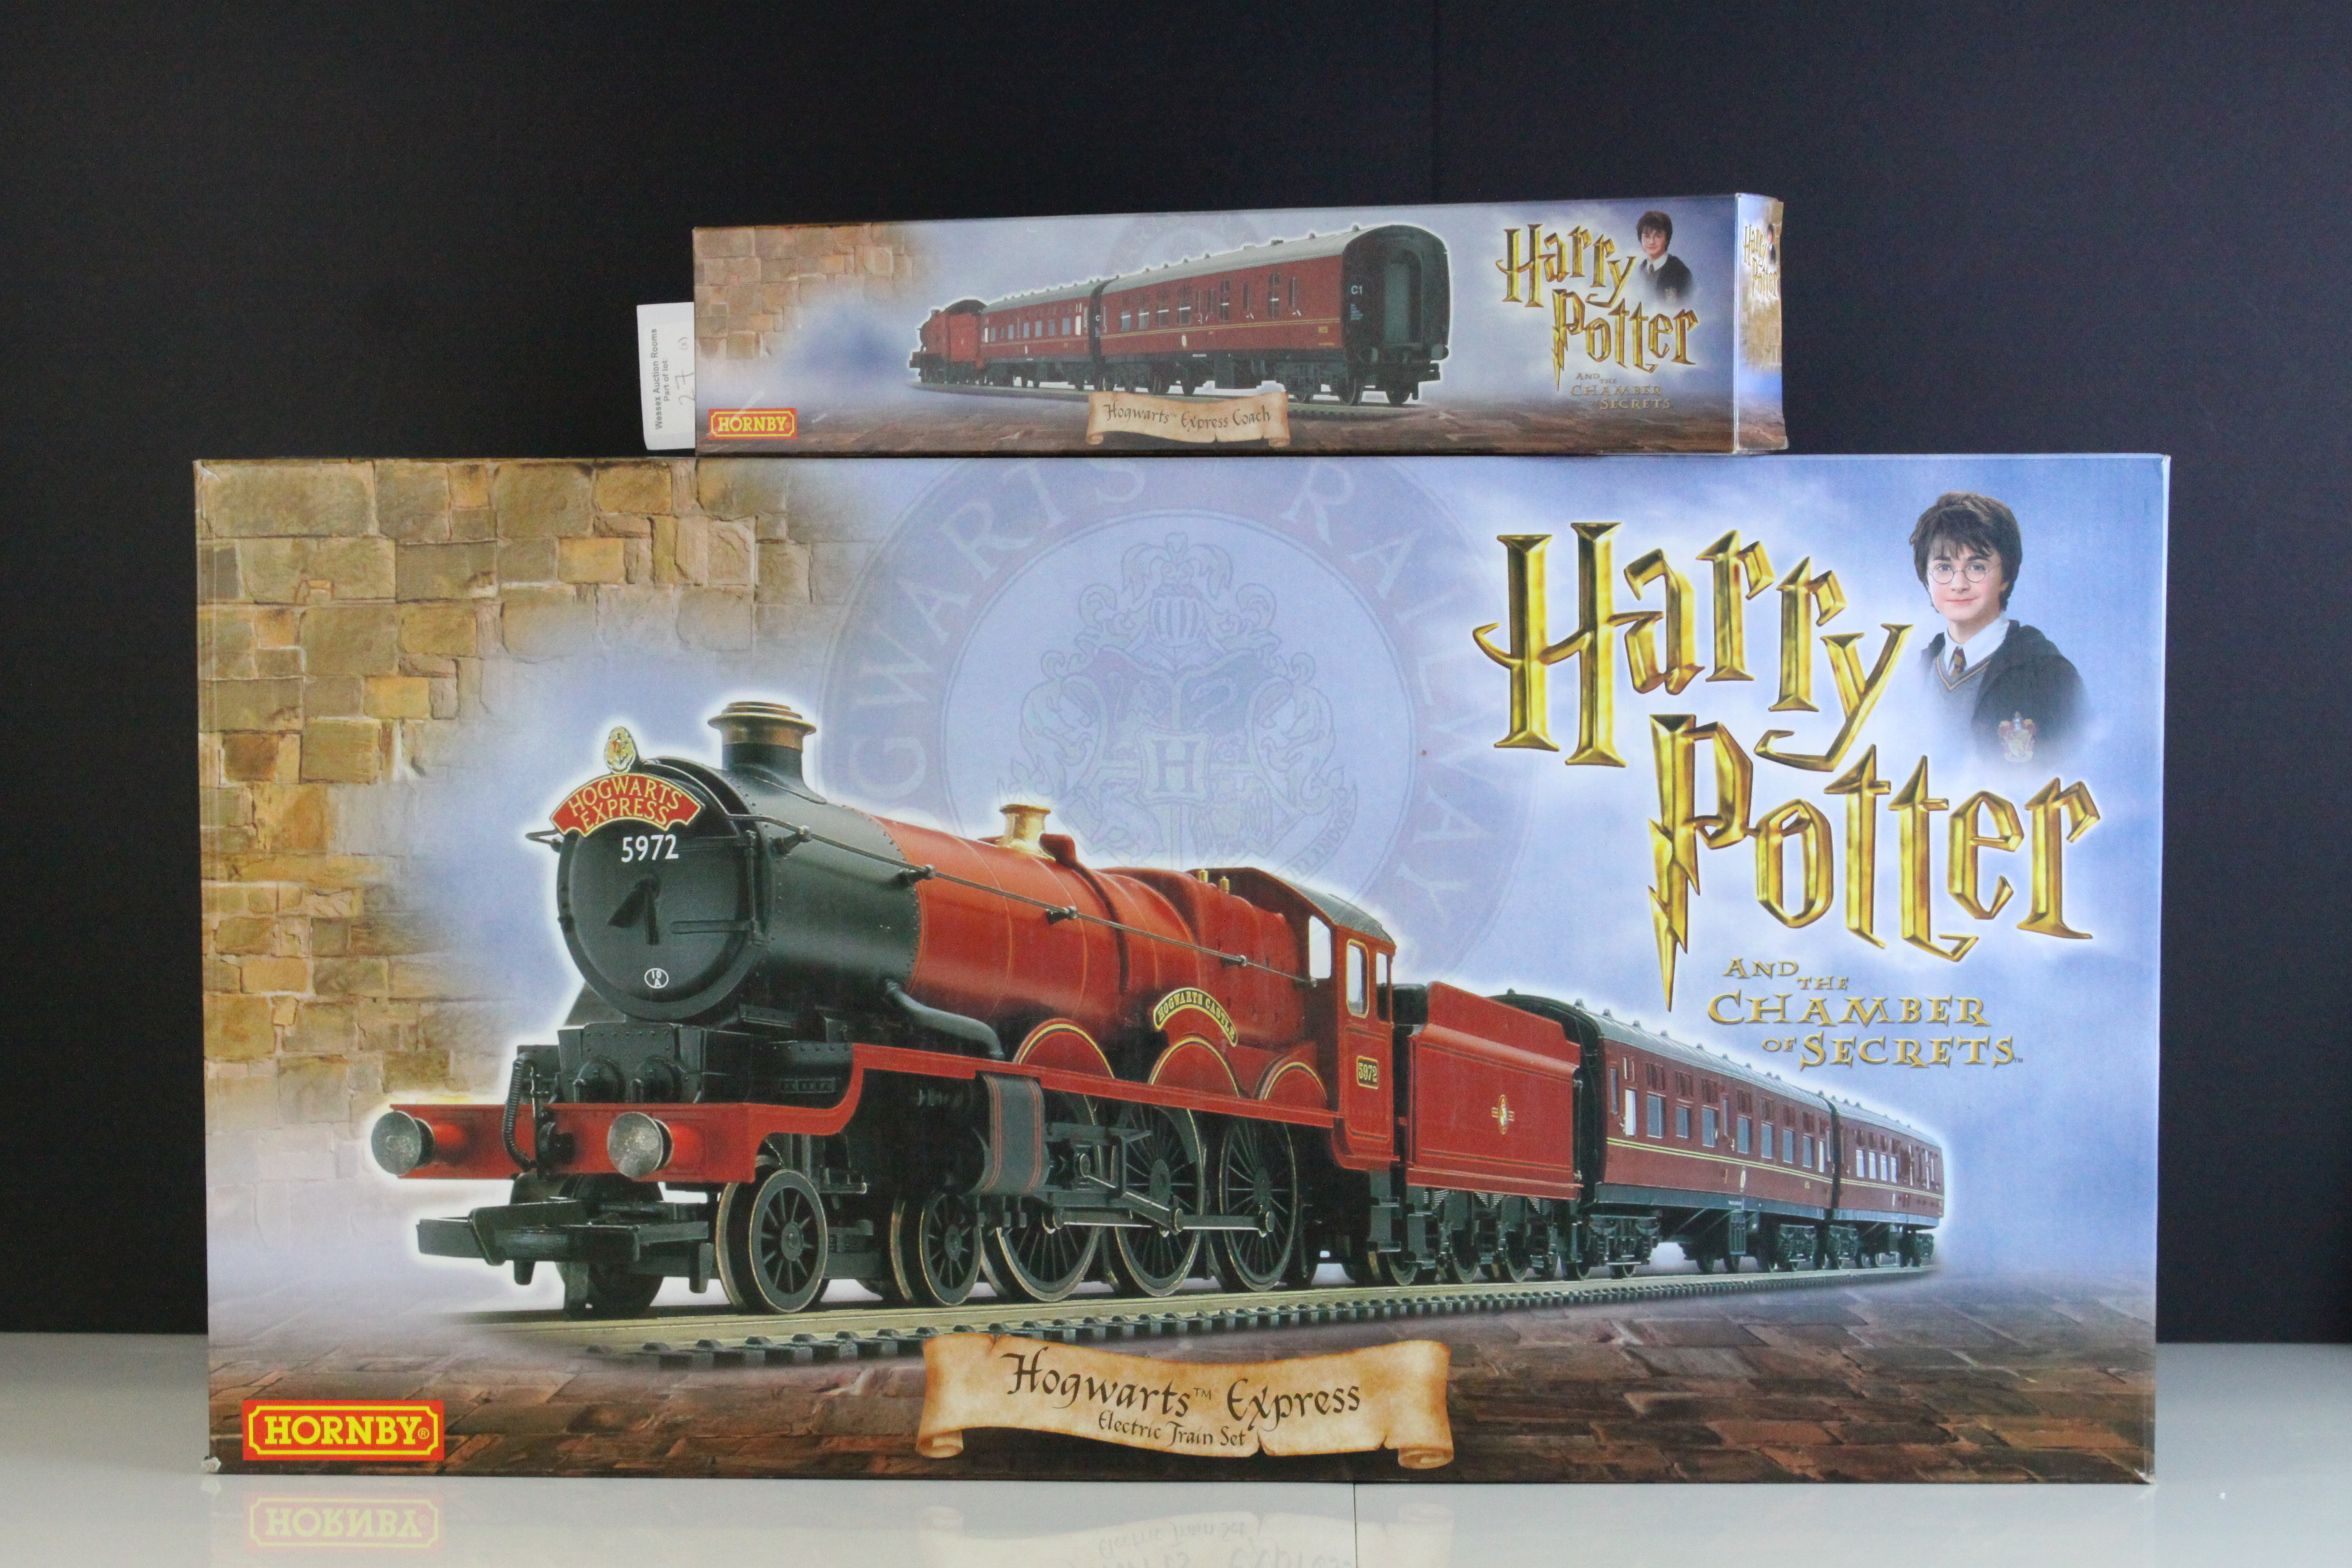 Boxed Hornby OO Gauge Harry Potter and The Chamber of Secrets Hogwarts Express electric train set,